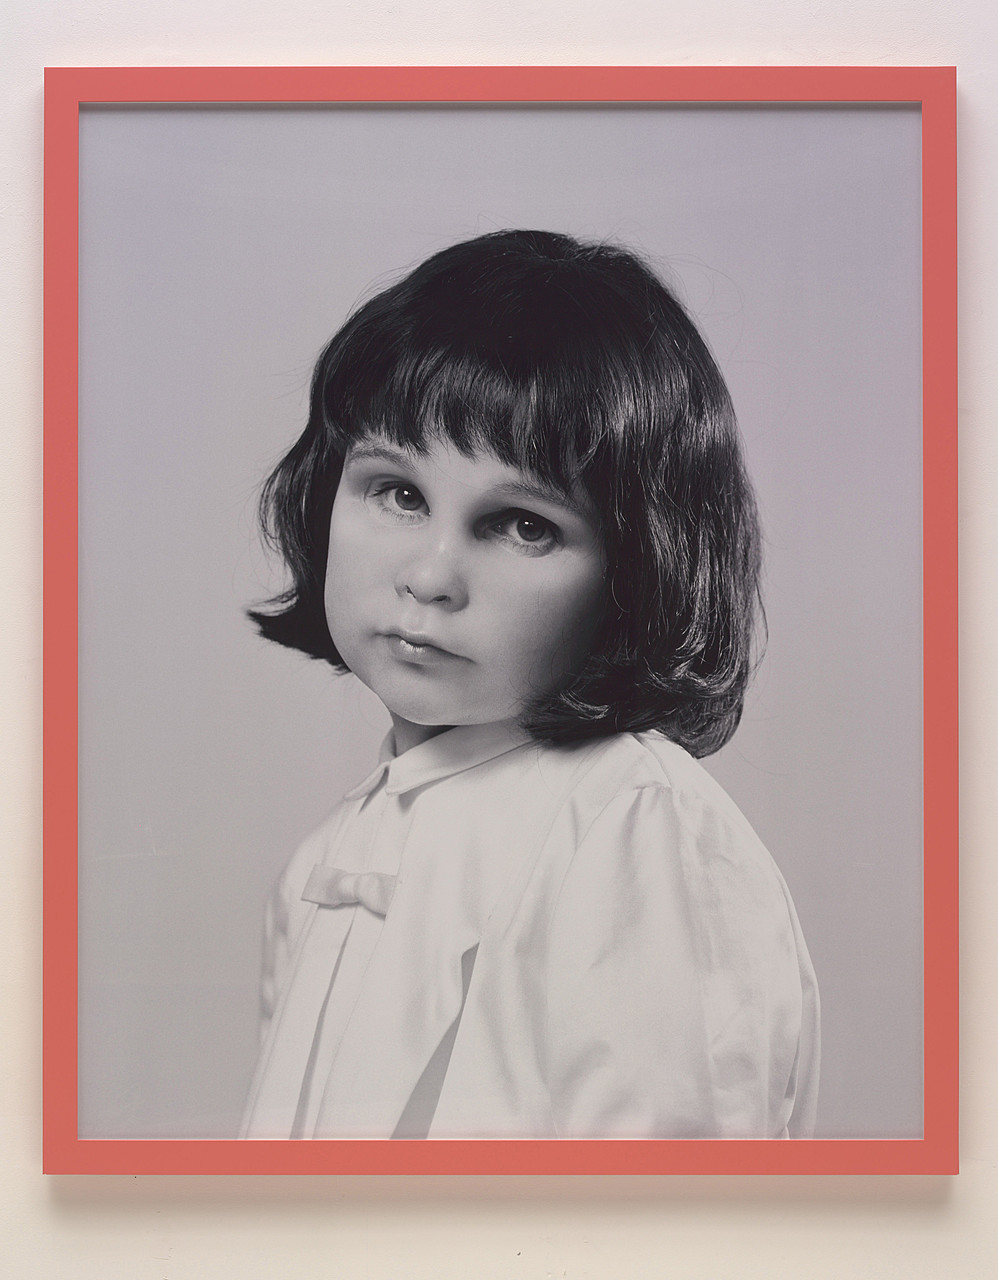 at Three Years Old | The Guggenheim and Foundation